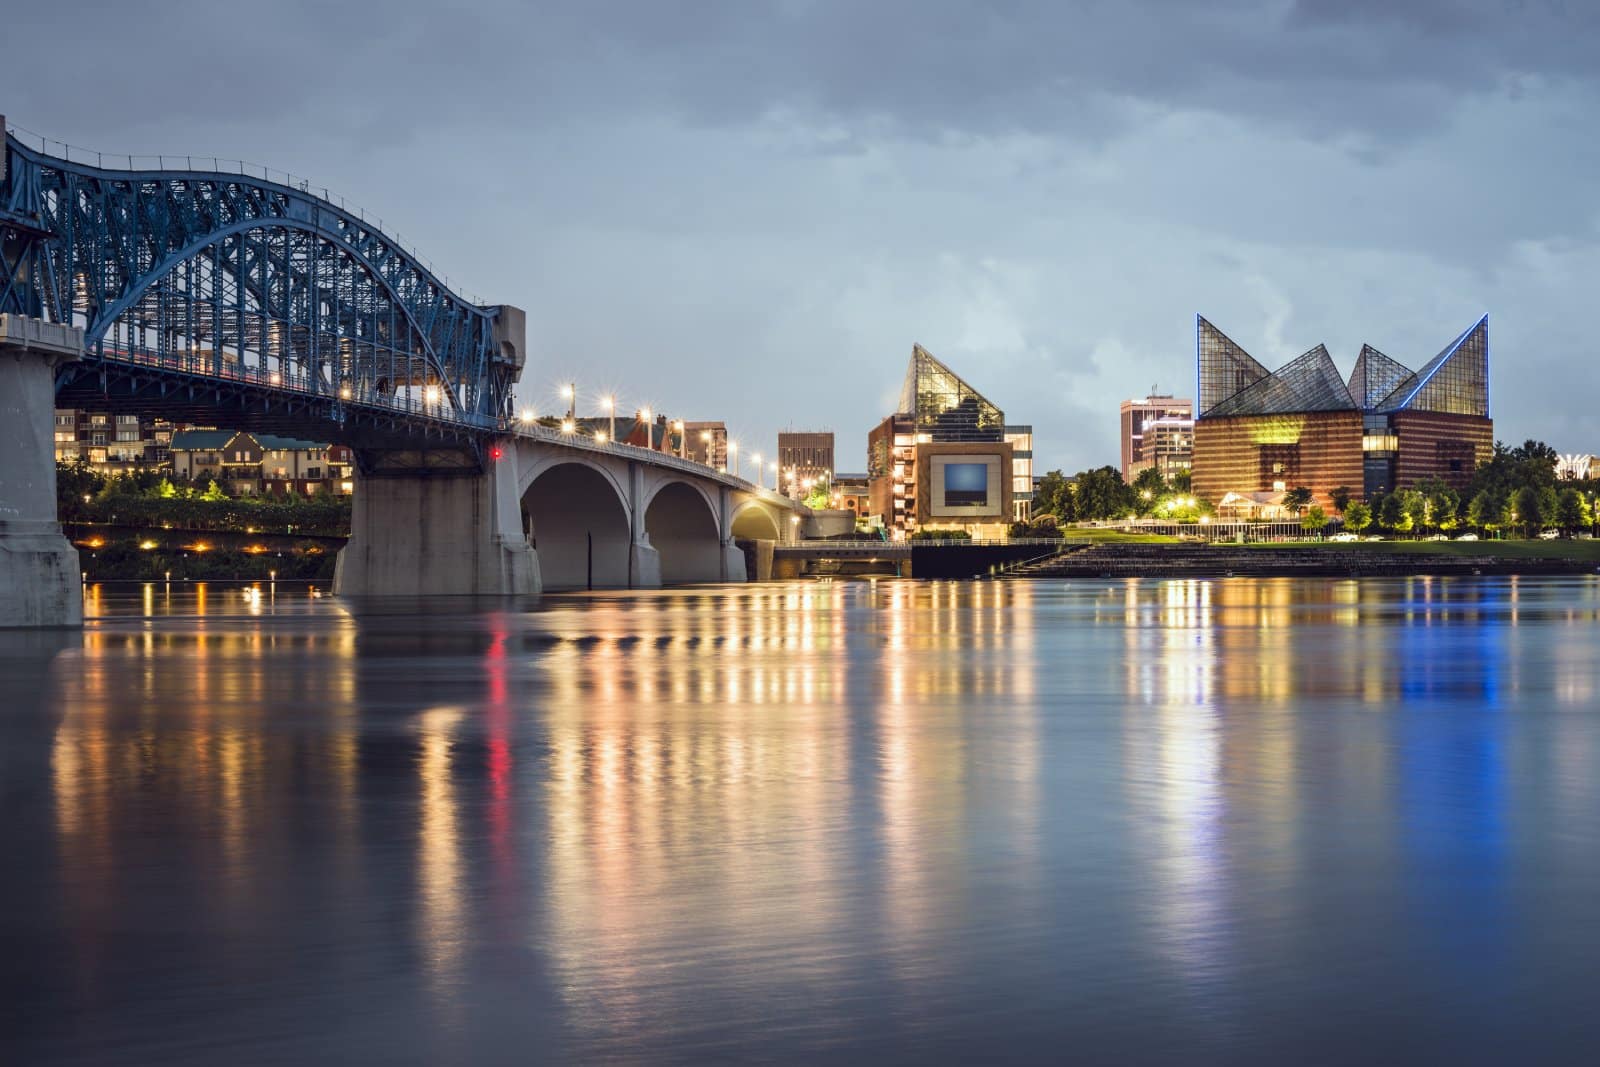 <p class="wp-caption-text">Image Credit: Shutterstock / Sean Pavone</p>  <p><span>Innovative, scenic, and full of adventure, Chattanooga offers the best of both worlds. Enjoy its outdoor beauty, tech-savvy downtown, and rich Civil War history.</span></p>